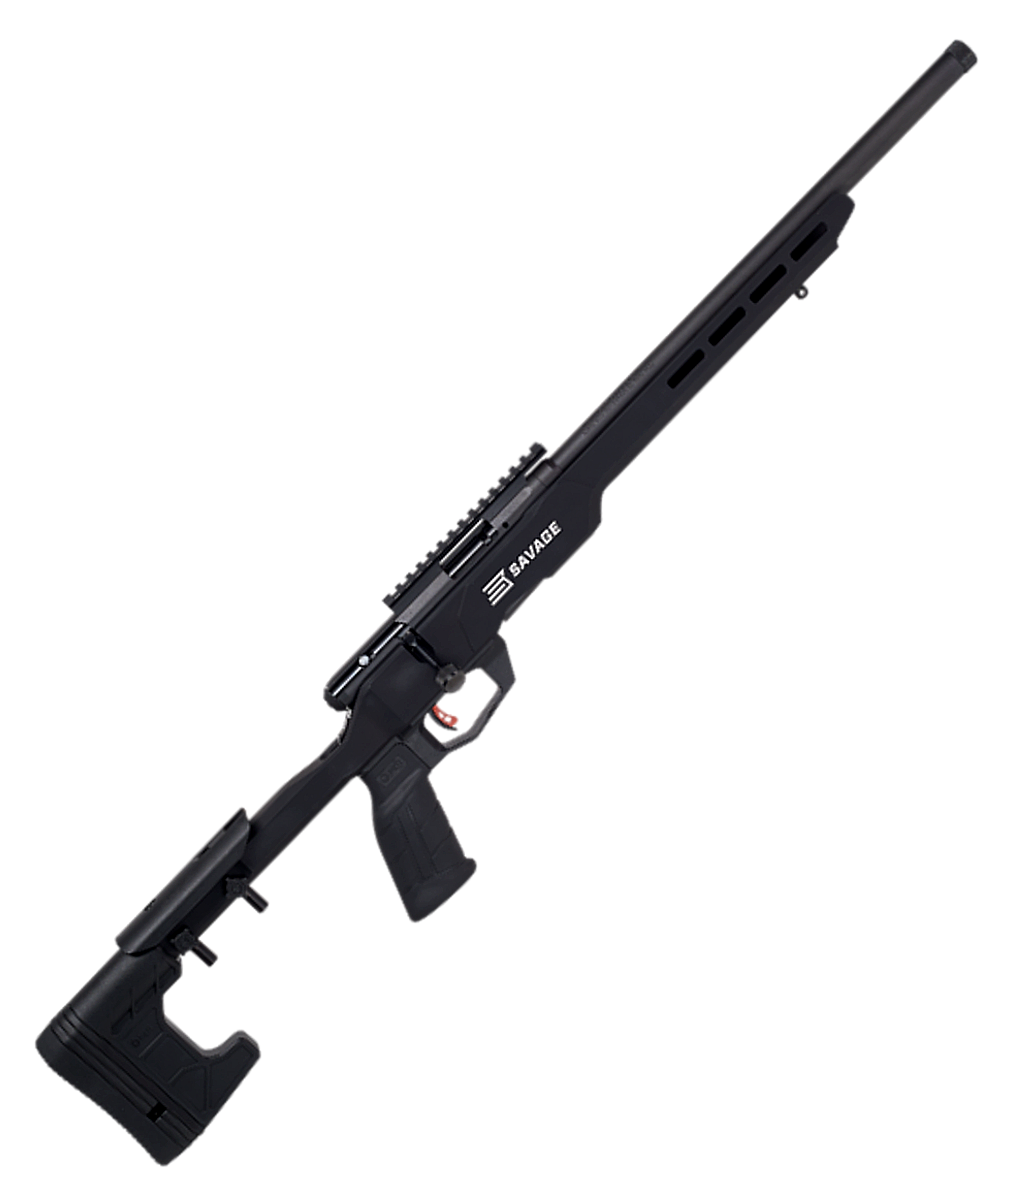 Savage 70248 B22 Precision Bolt Action Rifle, 22LR, 18" Threaded Heavy Bbl, MDT Chassis, AccuTrigger, 10+1 Rnd, 0685-2334